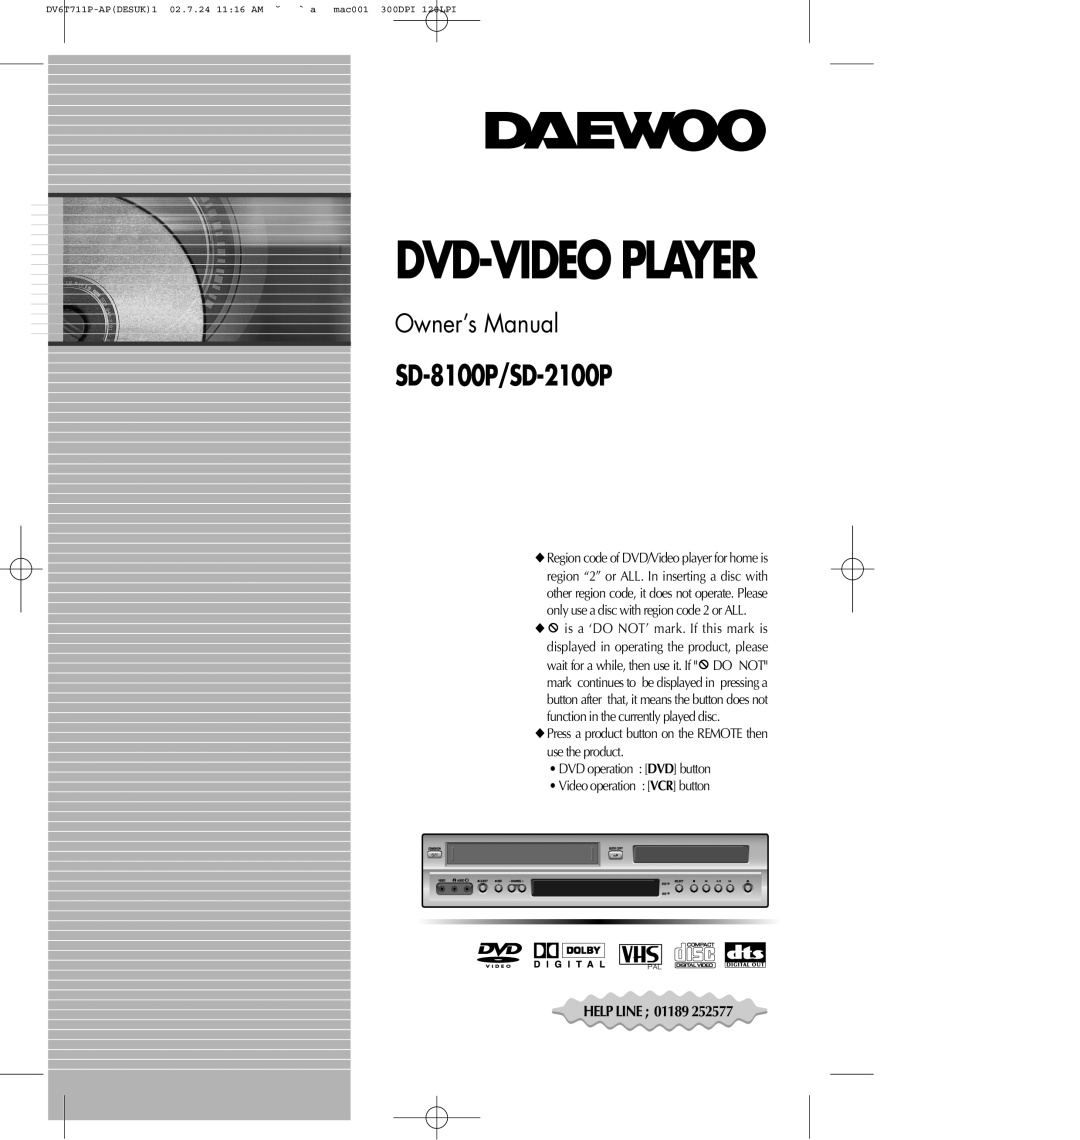 Daewoo owner manual Dvd-Video Player, SD-8100P/SD-2100P, Owner’s Manual 